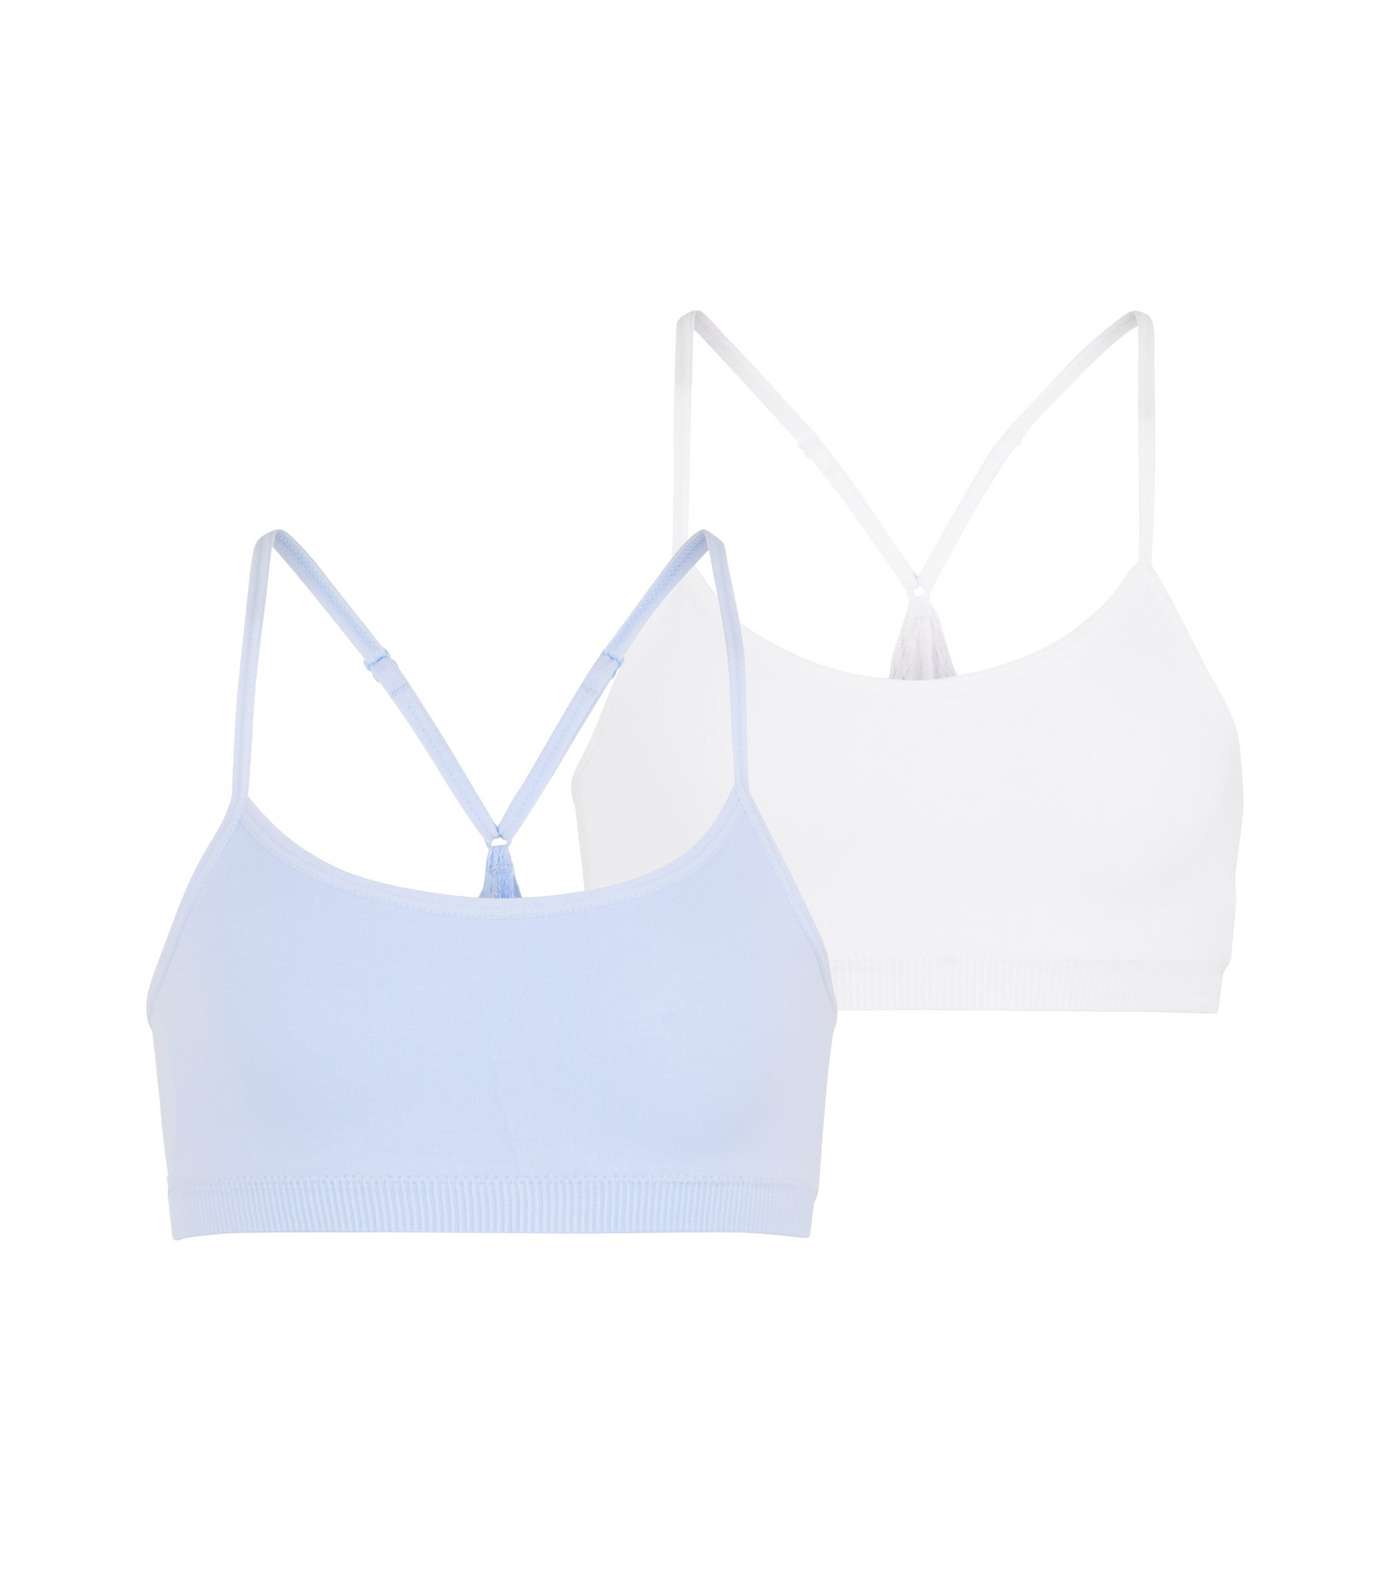 Girls 2 Pack Pale Blue and White Lace Trim Crop Tops